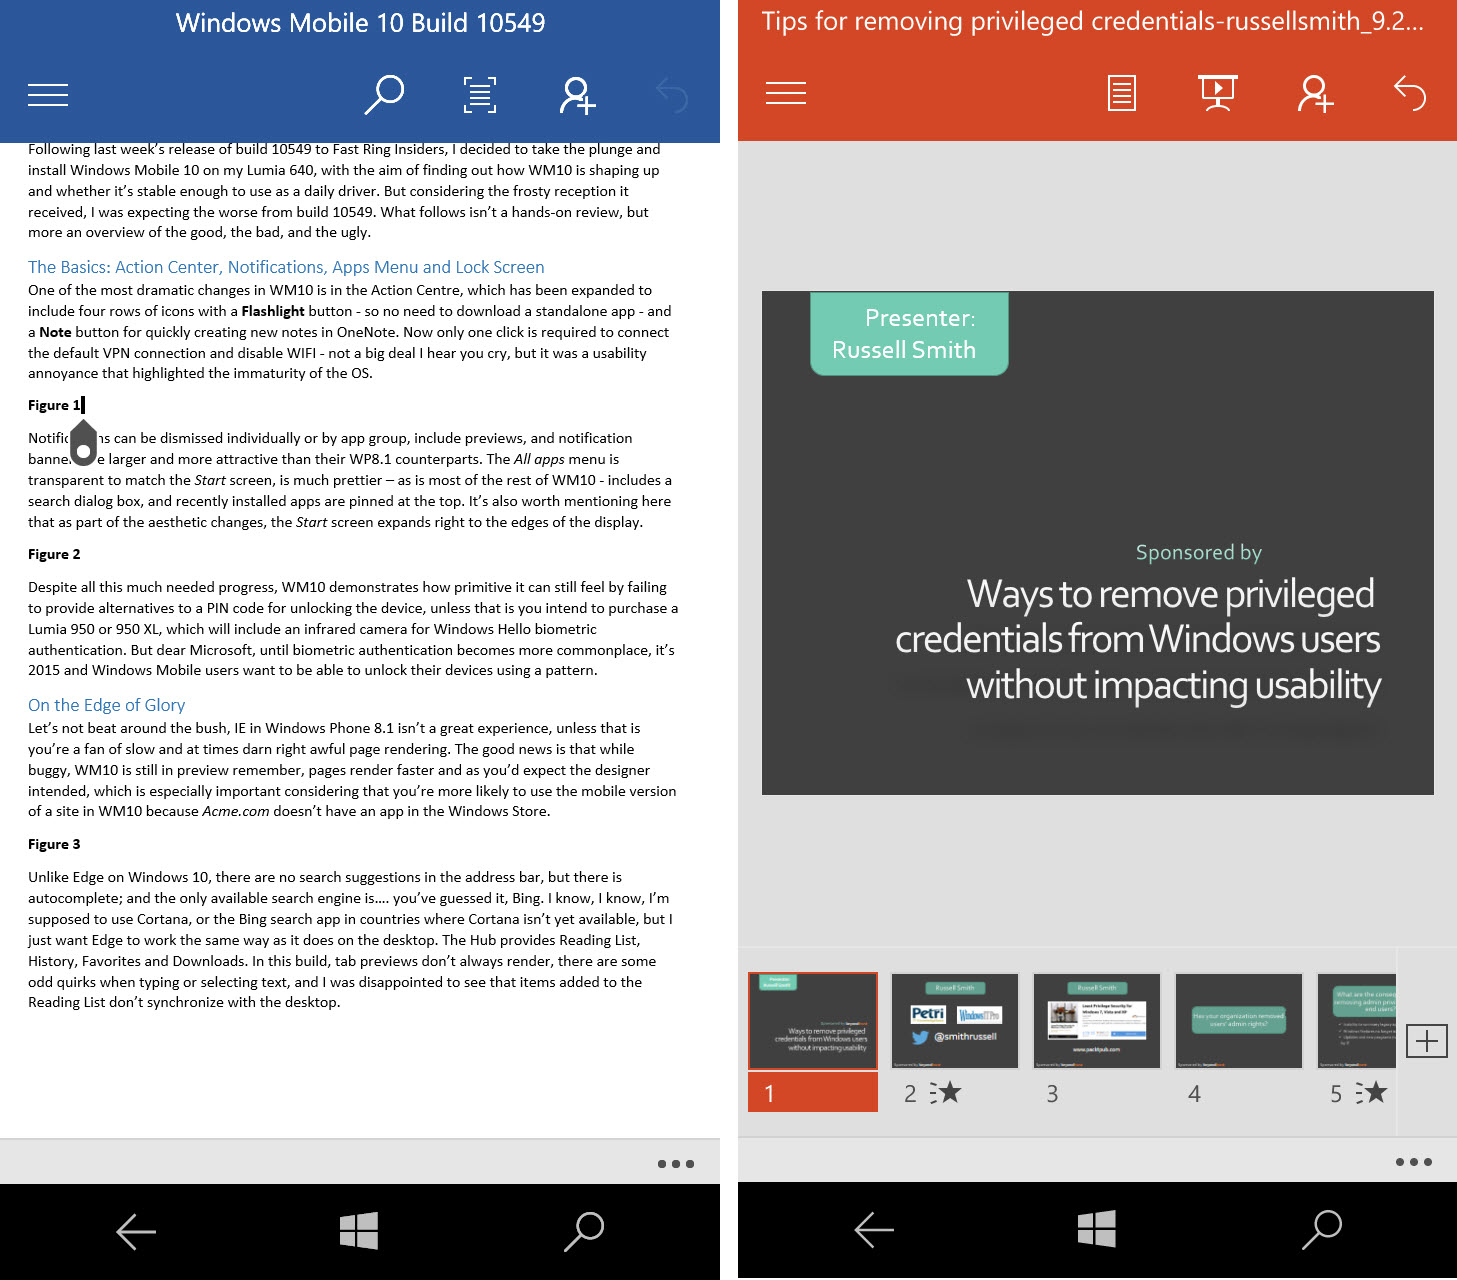 Microsoft Word and PowerPoint Universal Apps in Windows 10 Mobile (Image Credit: Russell Smith)